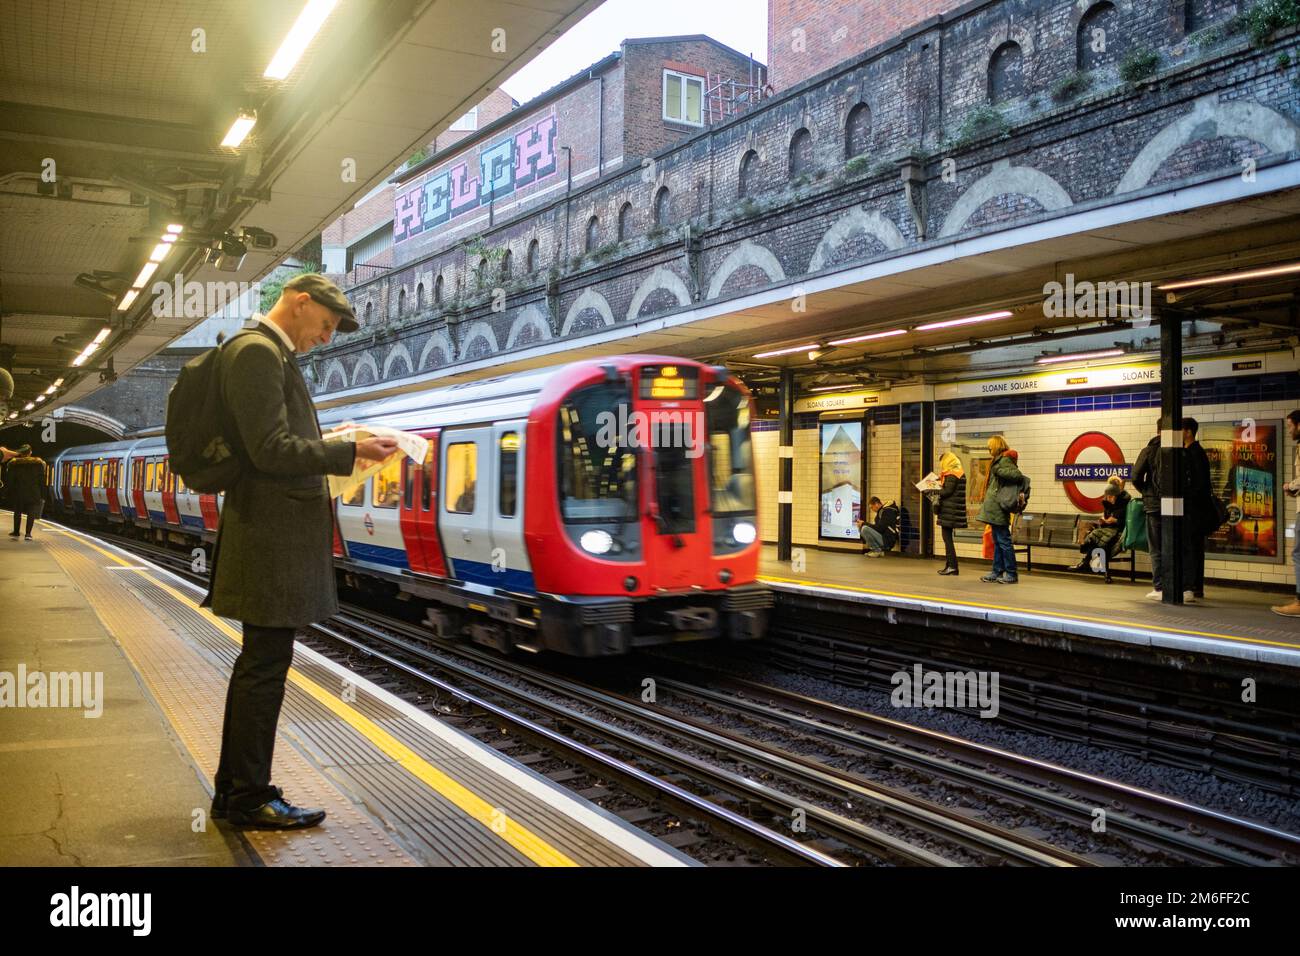 London- December 2022: Sloane Square Underground Station, district and circle line station in the upmarket area of Chelsea and Kensington Stock Photo